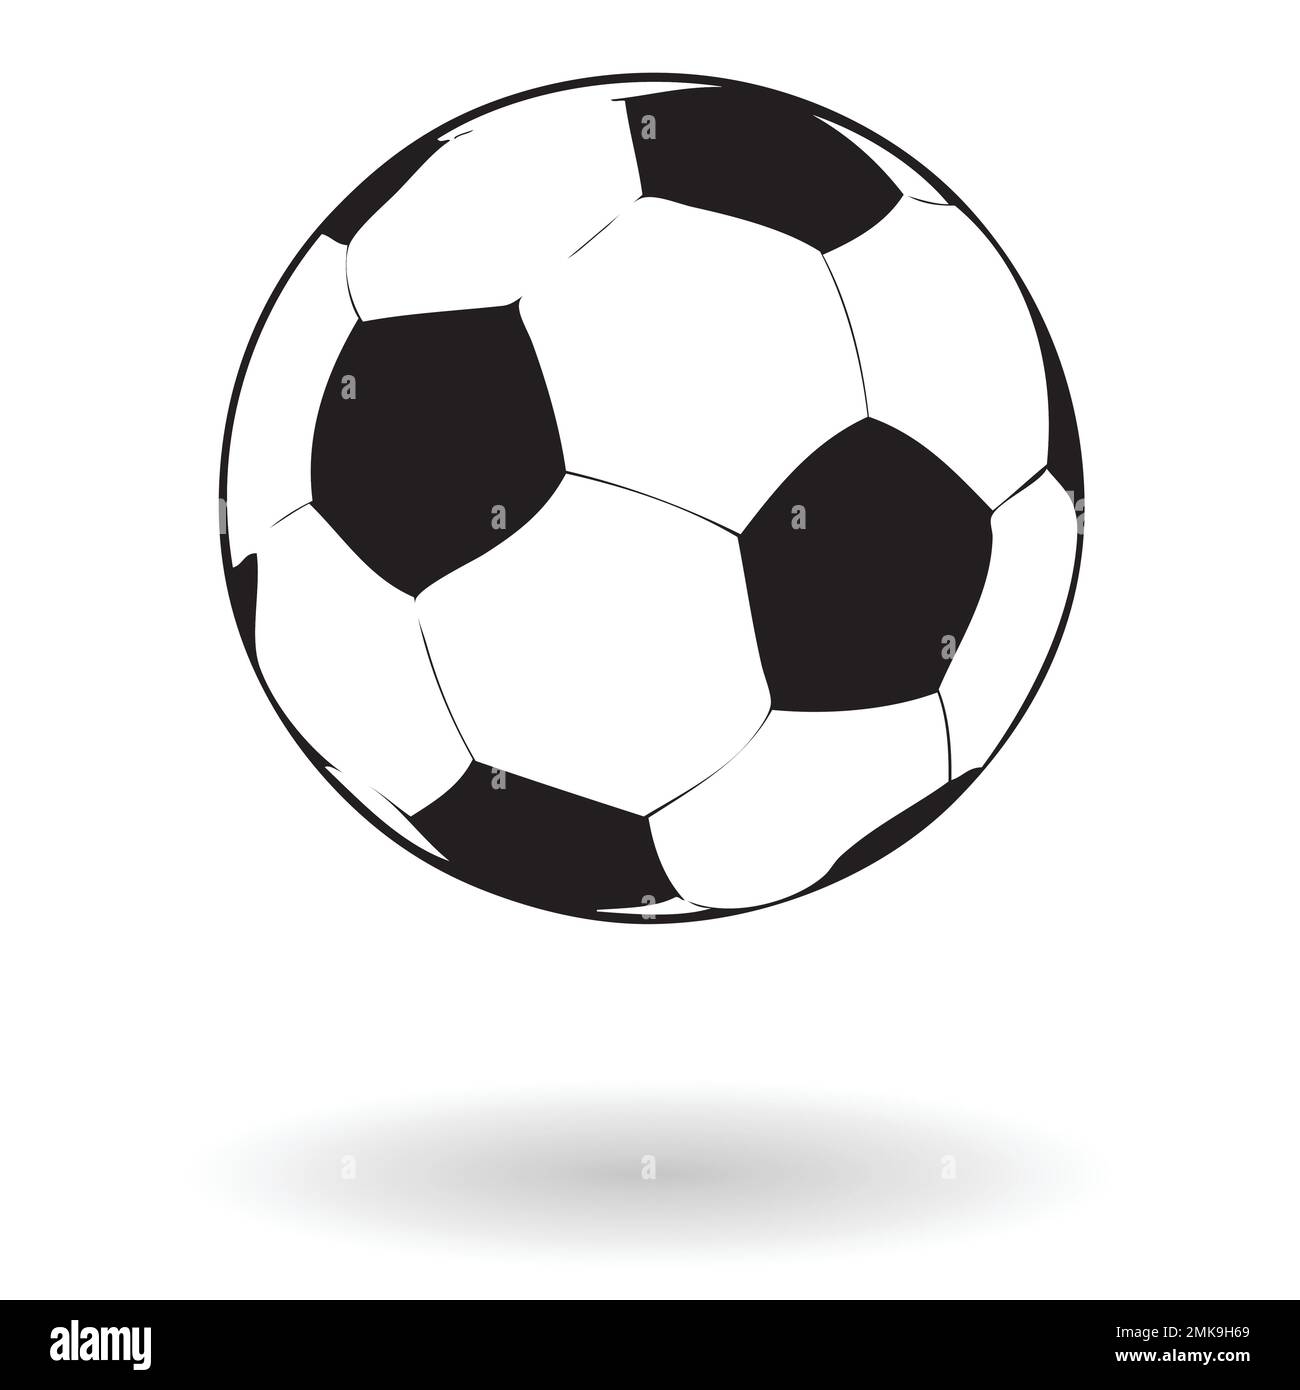 Football (soccer) ball icon with shadow over white background vector illustration. Sportclub logo concept Stock Vector